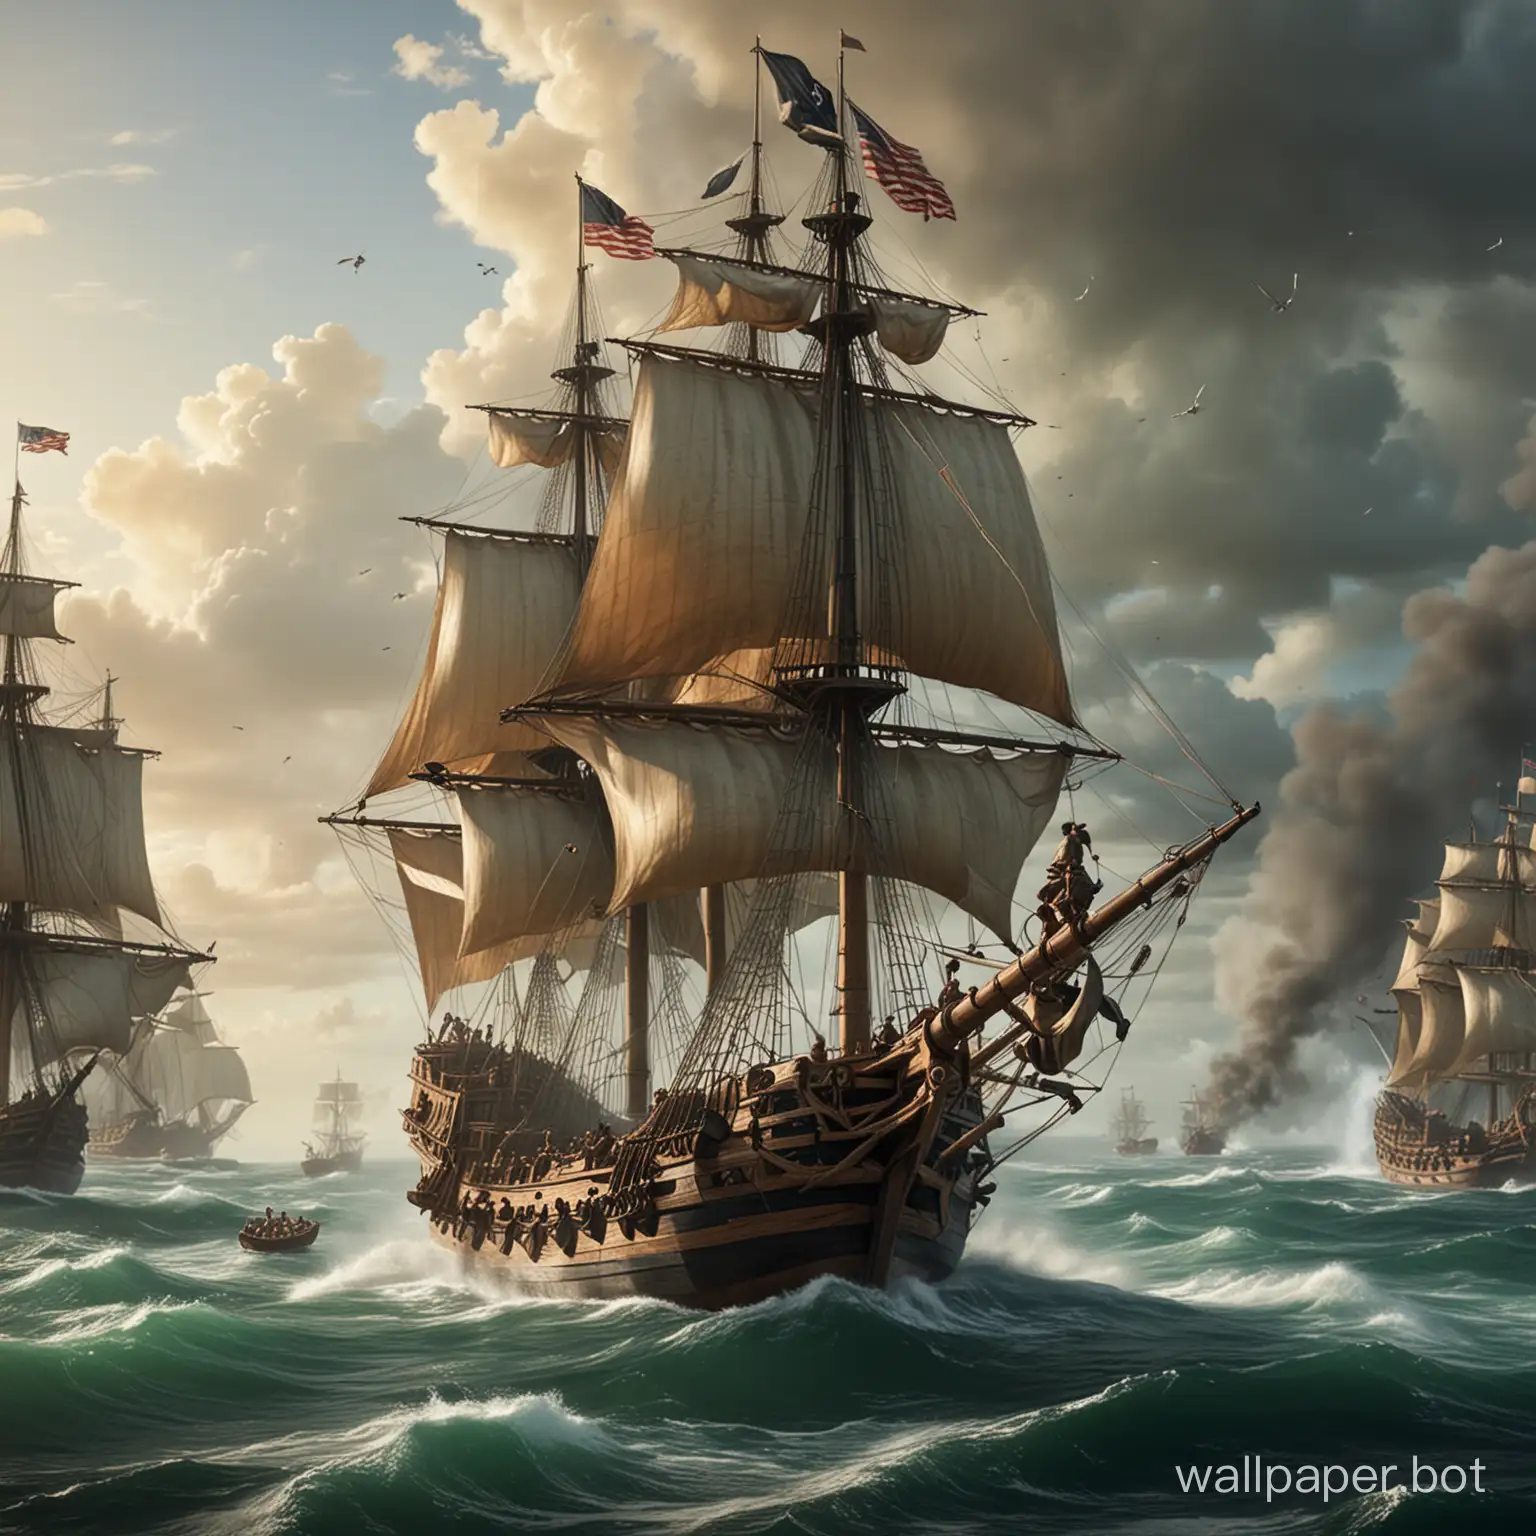 Old galleon navigating toward an island, firing cannons at another galleon, crew in the frenzy of combat